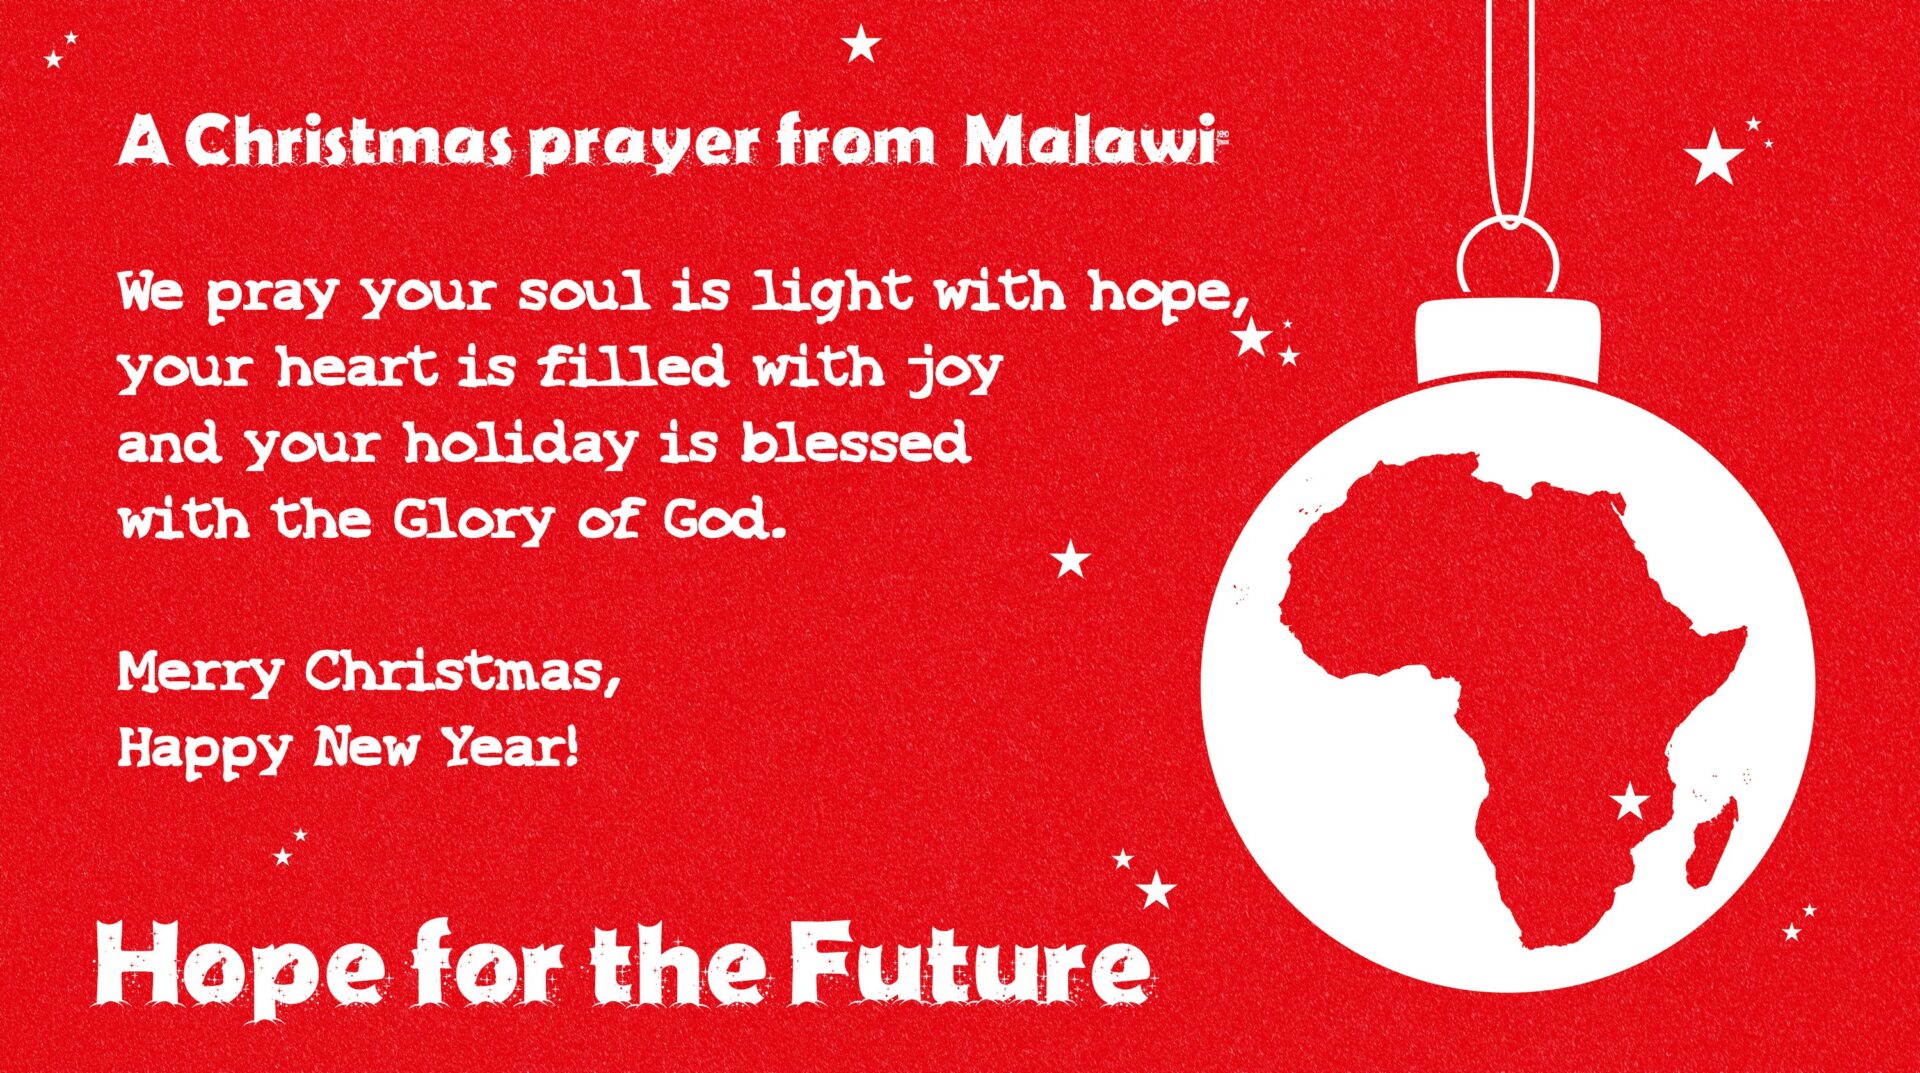 Christmas 2016 from Malawi